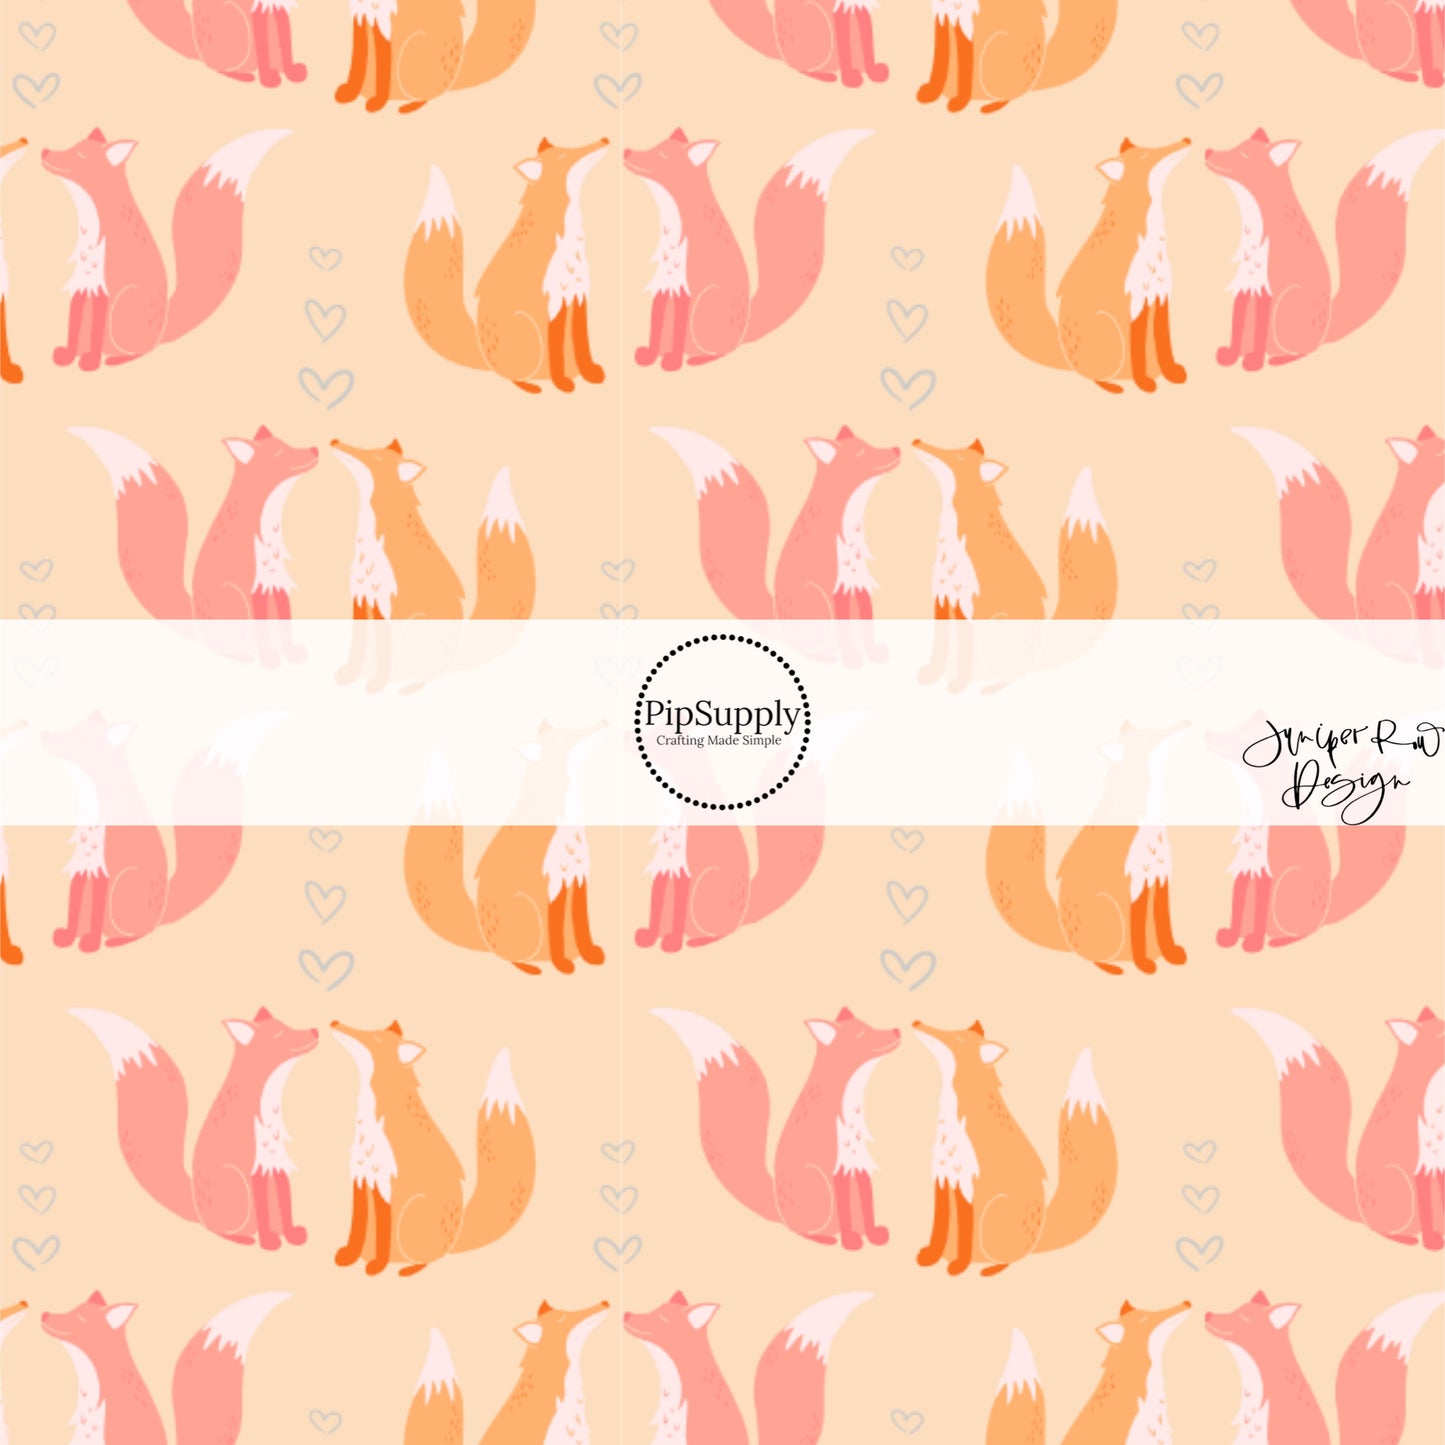 These Valentine's pattern themed fabric by the yard features foxes surrounded by hearts on cream. This fun Valentine's Day fabric can be used for all your sewing and crafting needs! 